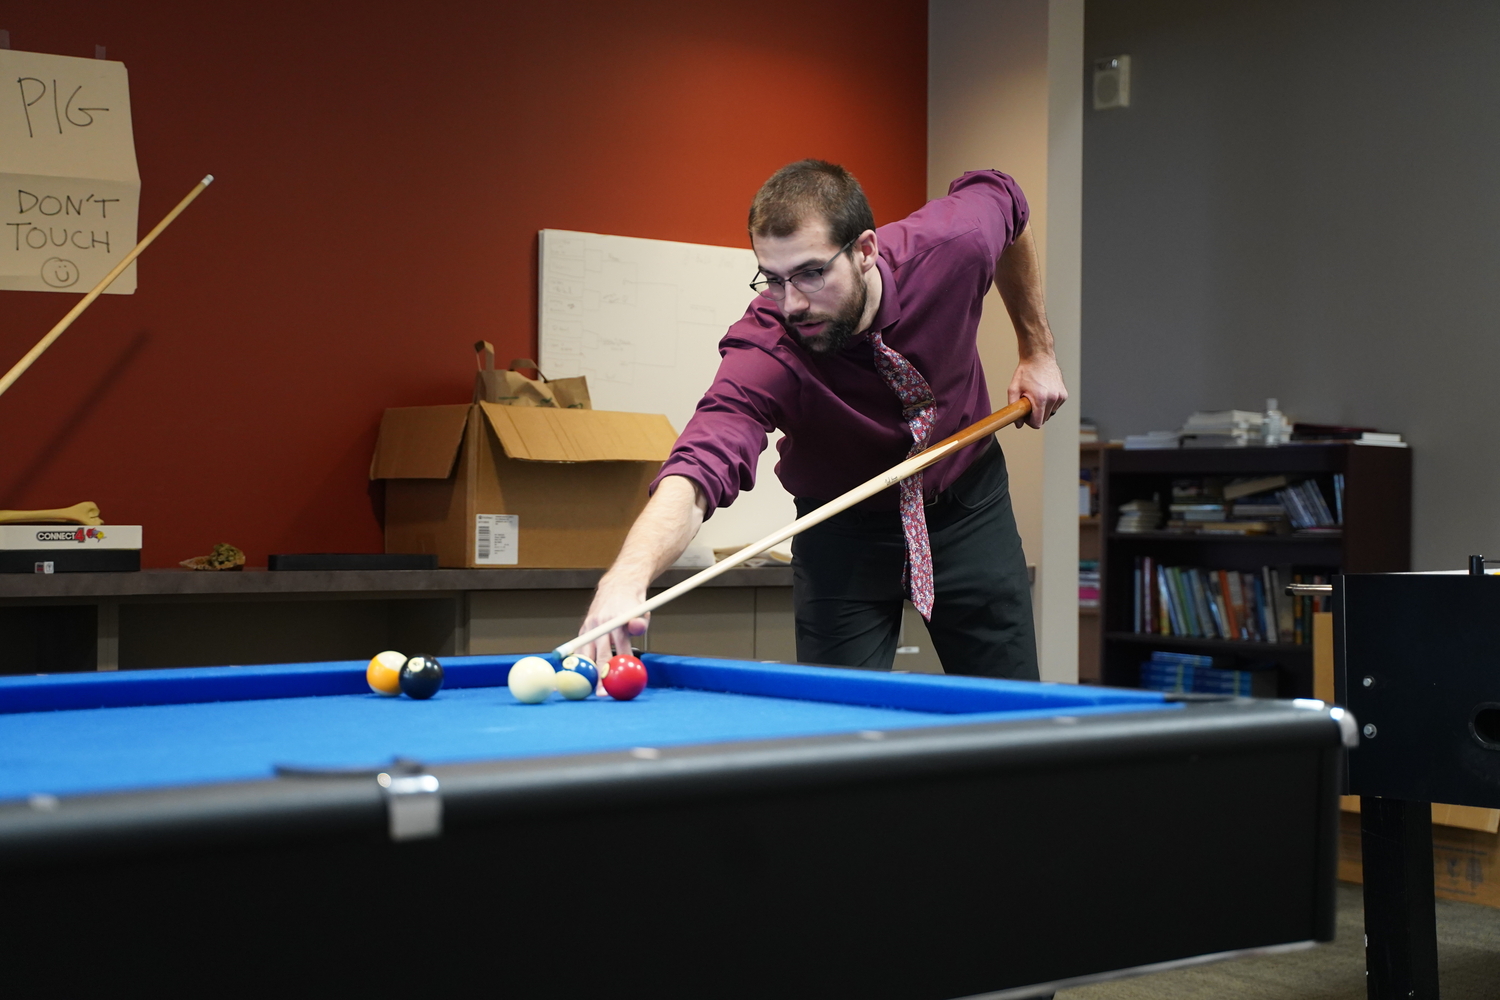 An image of an OUWB student playing pool